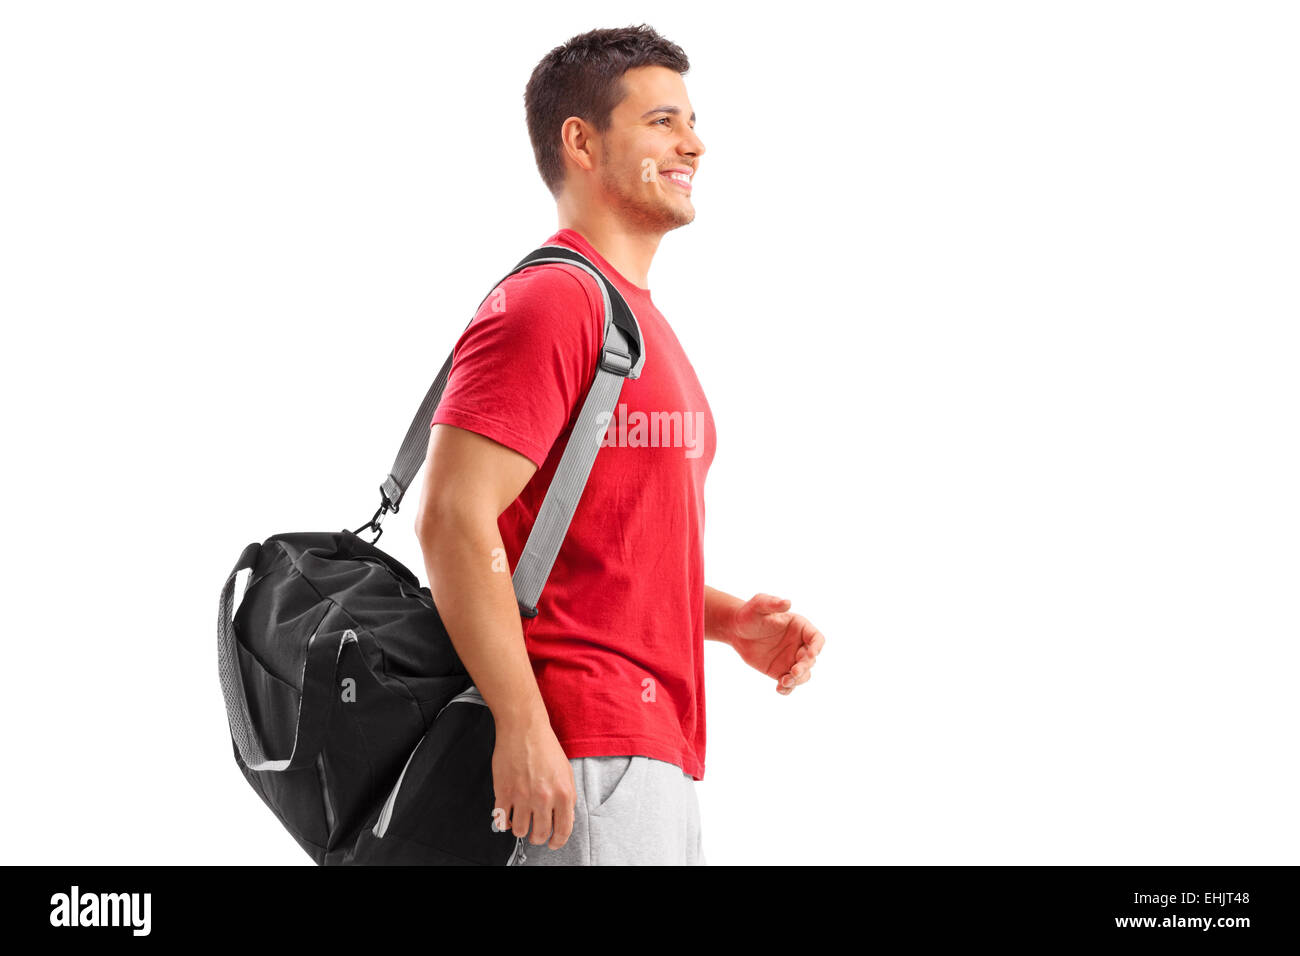 Male athlete walking with a sport bag isolated on white background Stock Photo